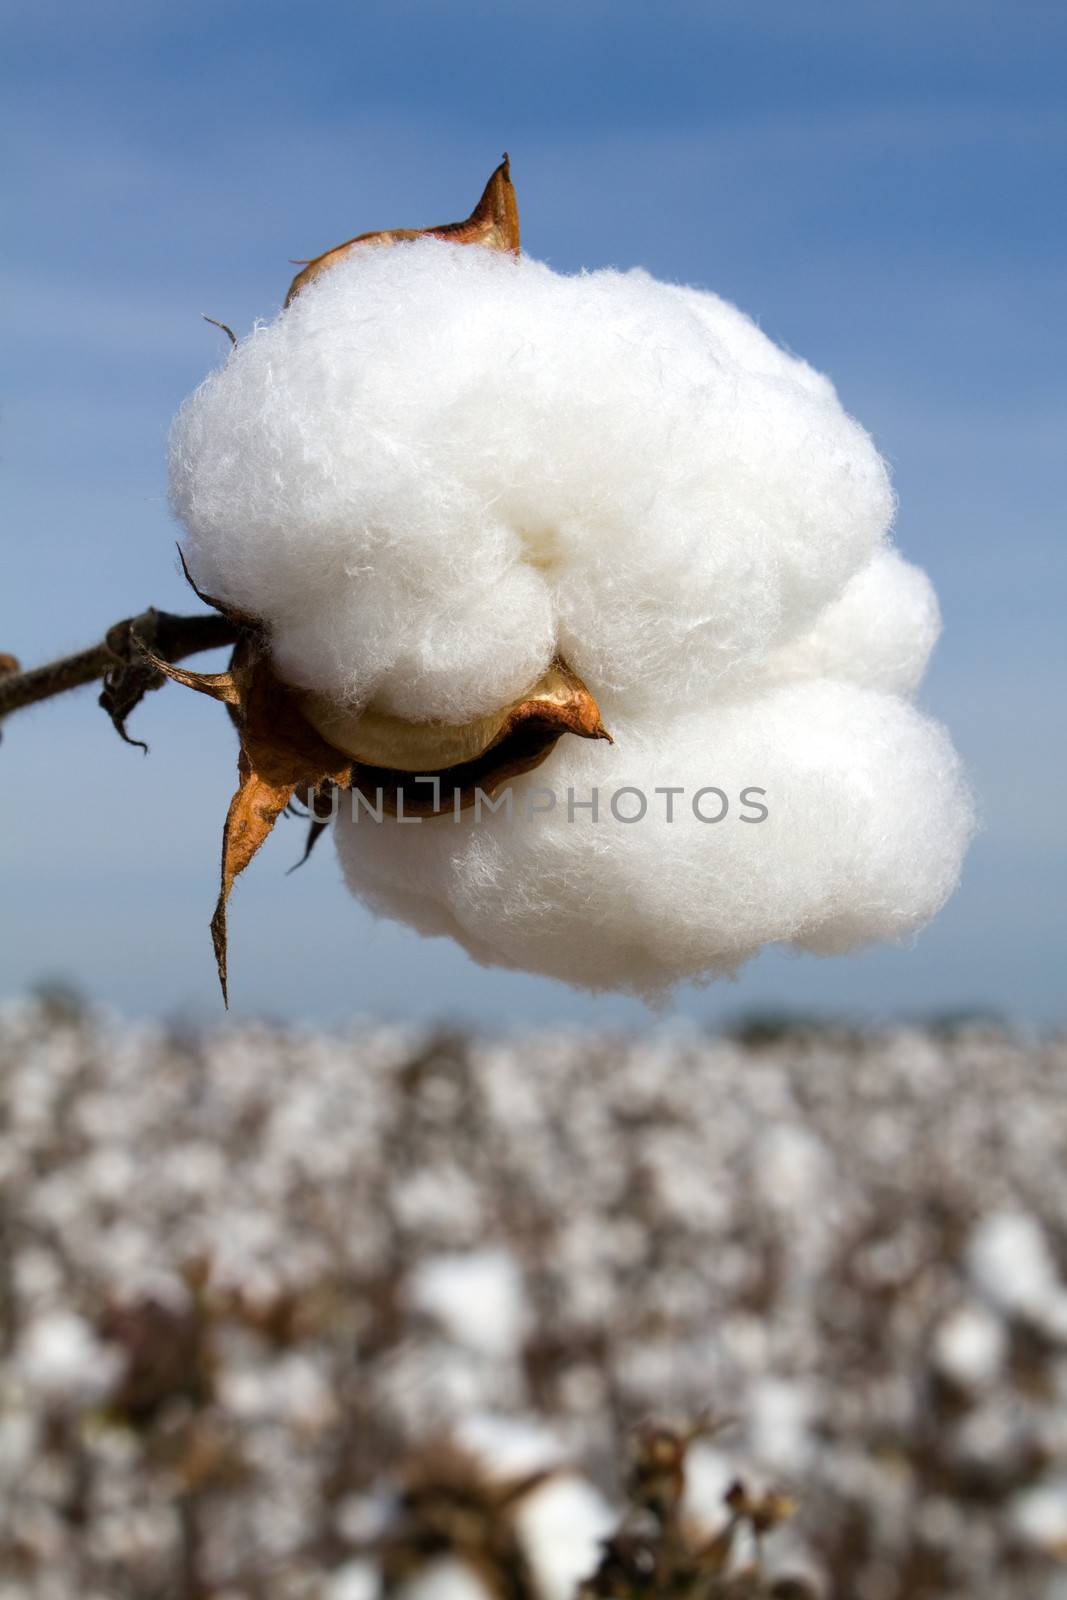 Cotton boll in a field ready to be harvested.